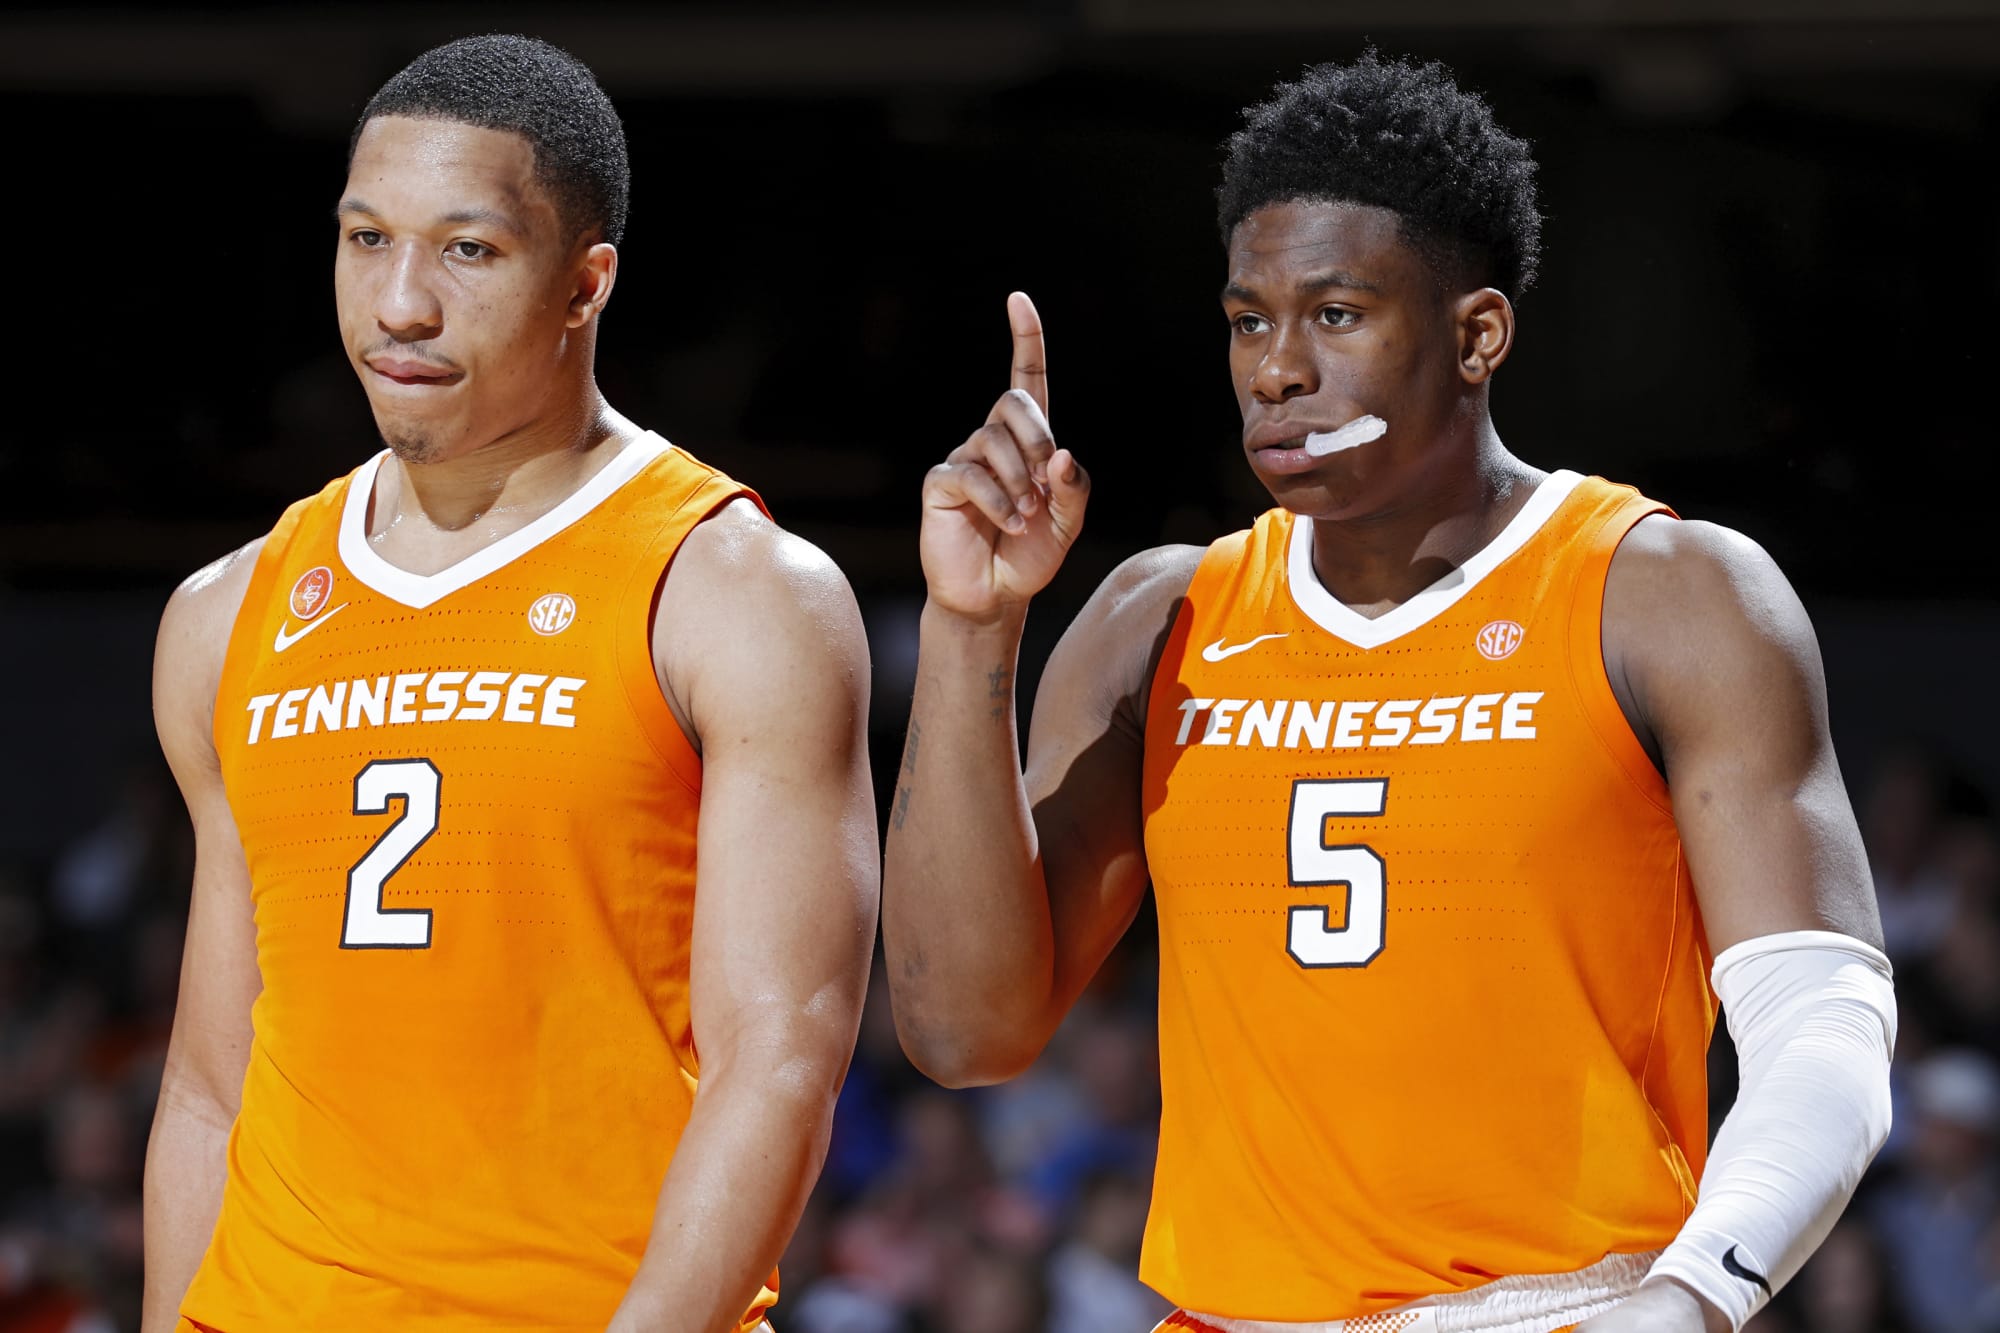 GRANT WILLIAMS & ADMIRAL SCHOFIELD DUAL SIGNED TENNESSEE VOLS 8X10 PHOTO PROOF 